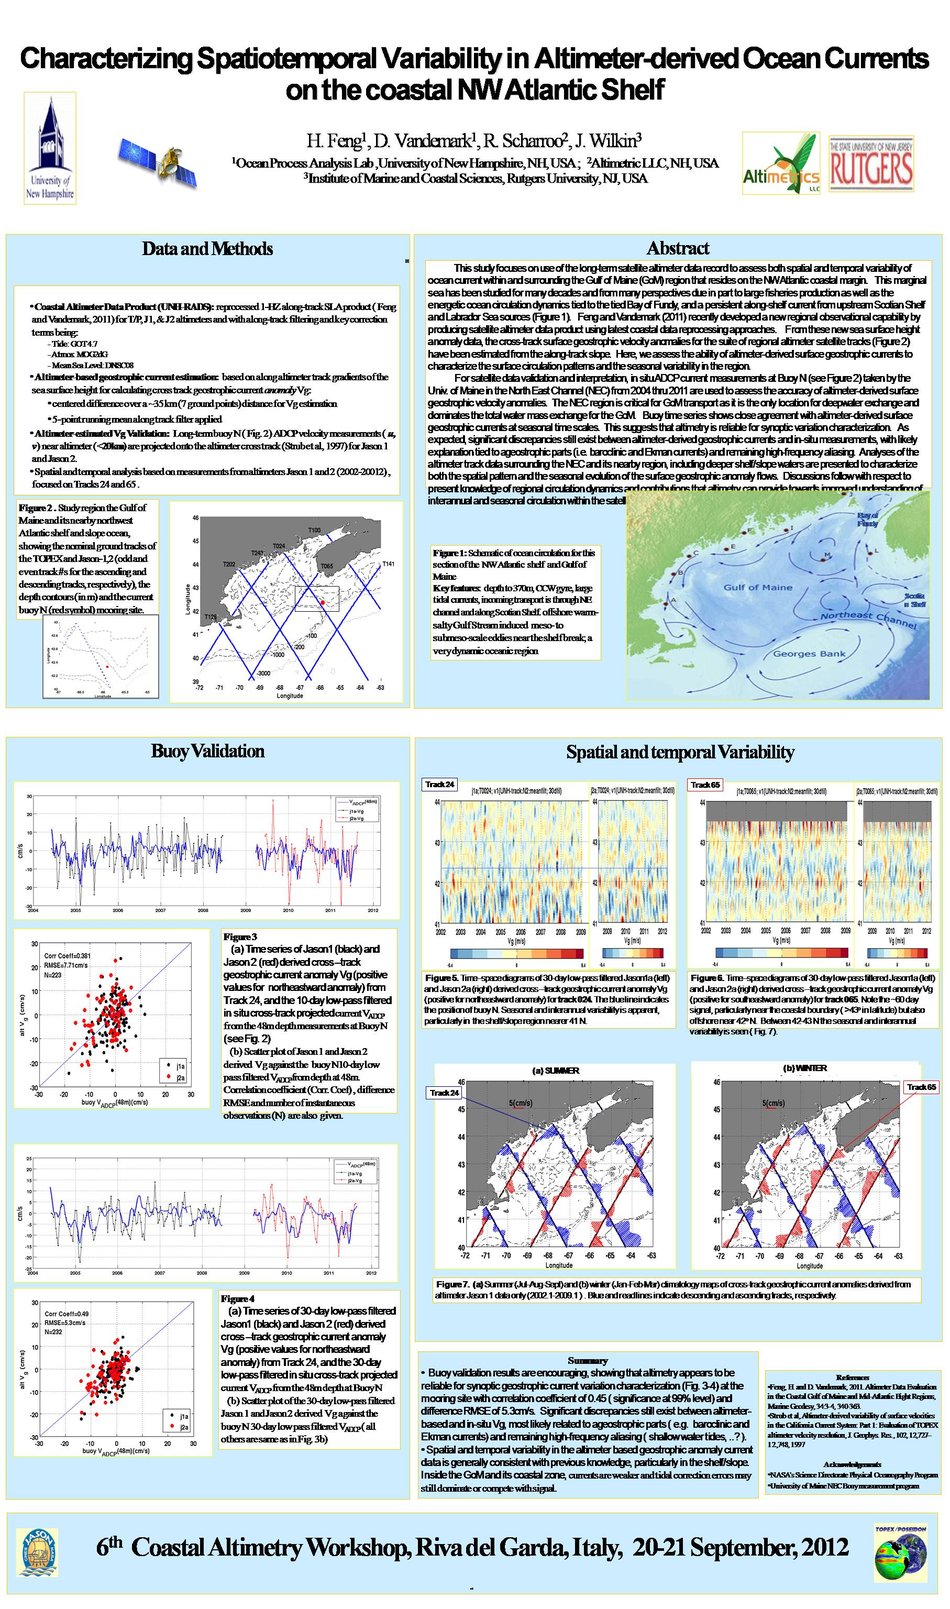 Characterizing Spatiotemporal Variability In Altimeter-Derived Ocean Currents On The Coastal Nw Atlantic Shelf  by hfengg